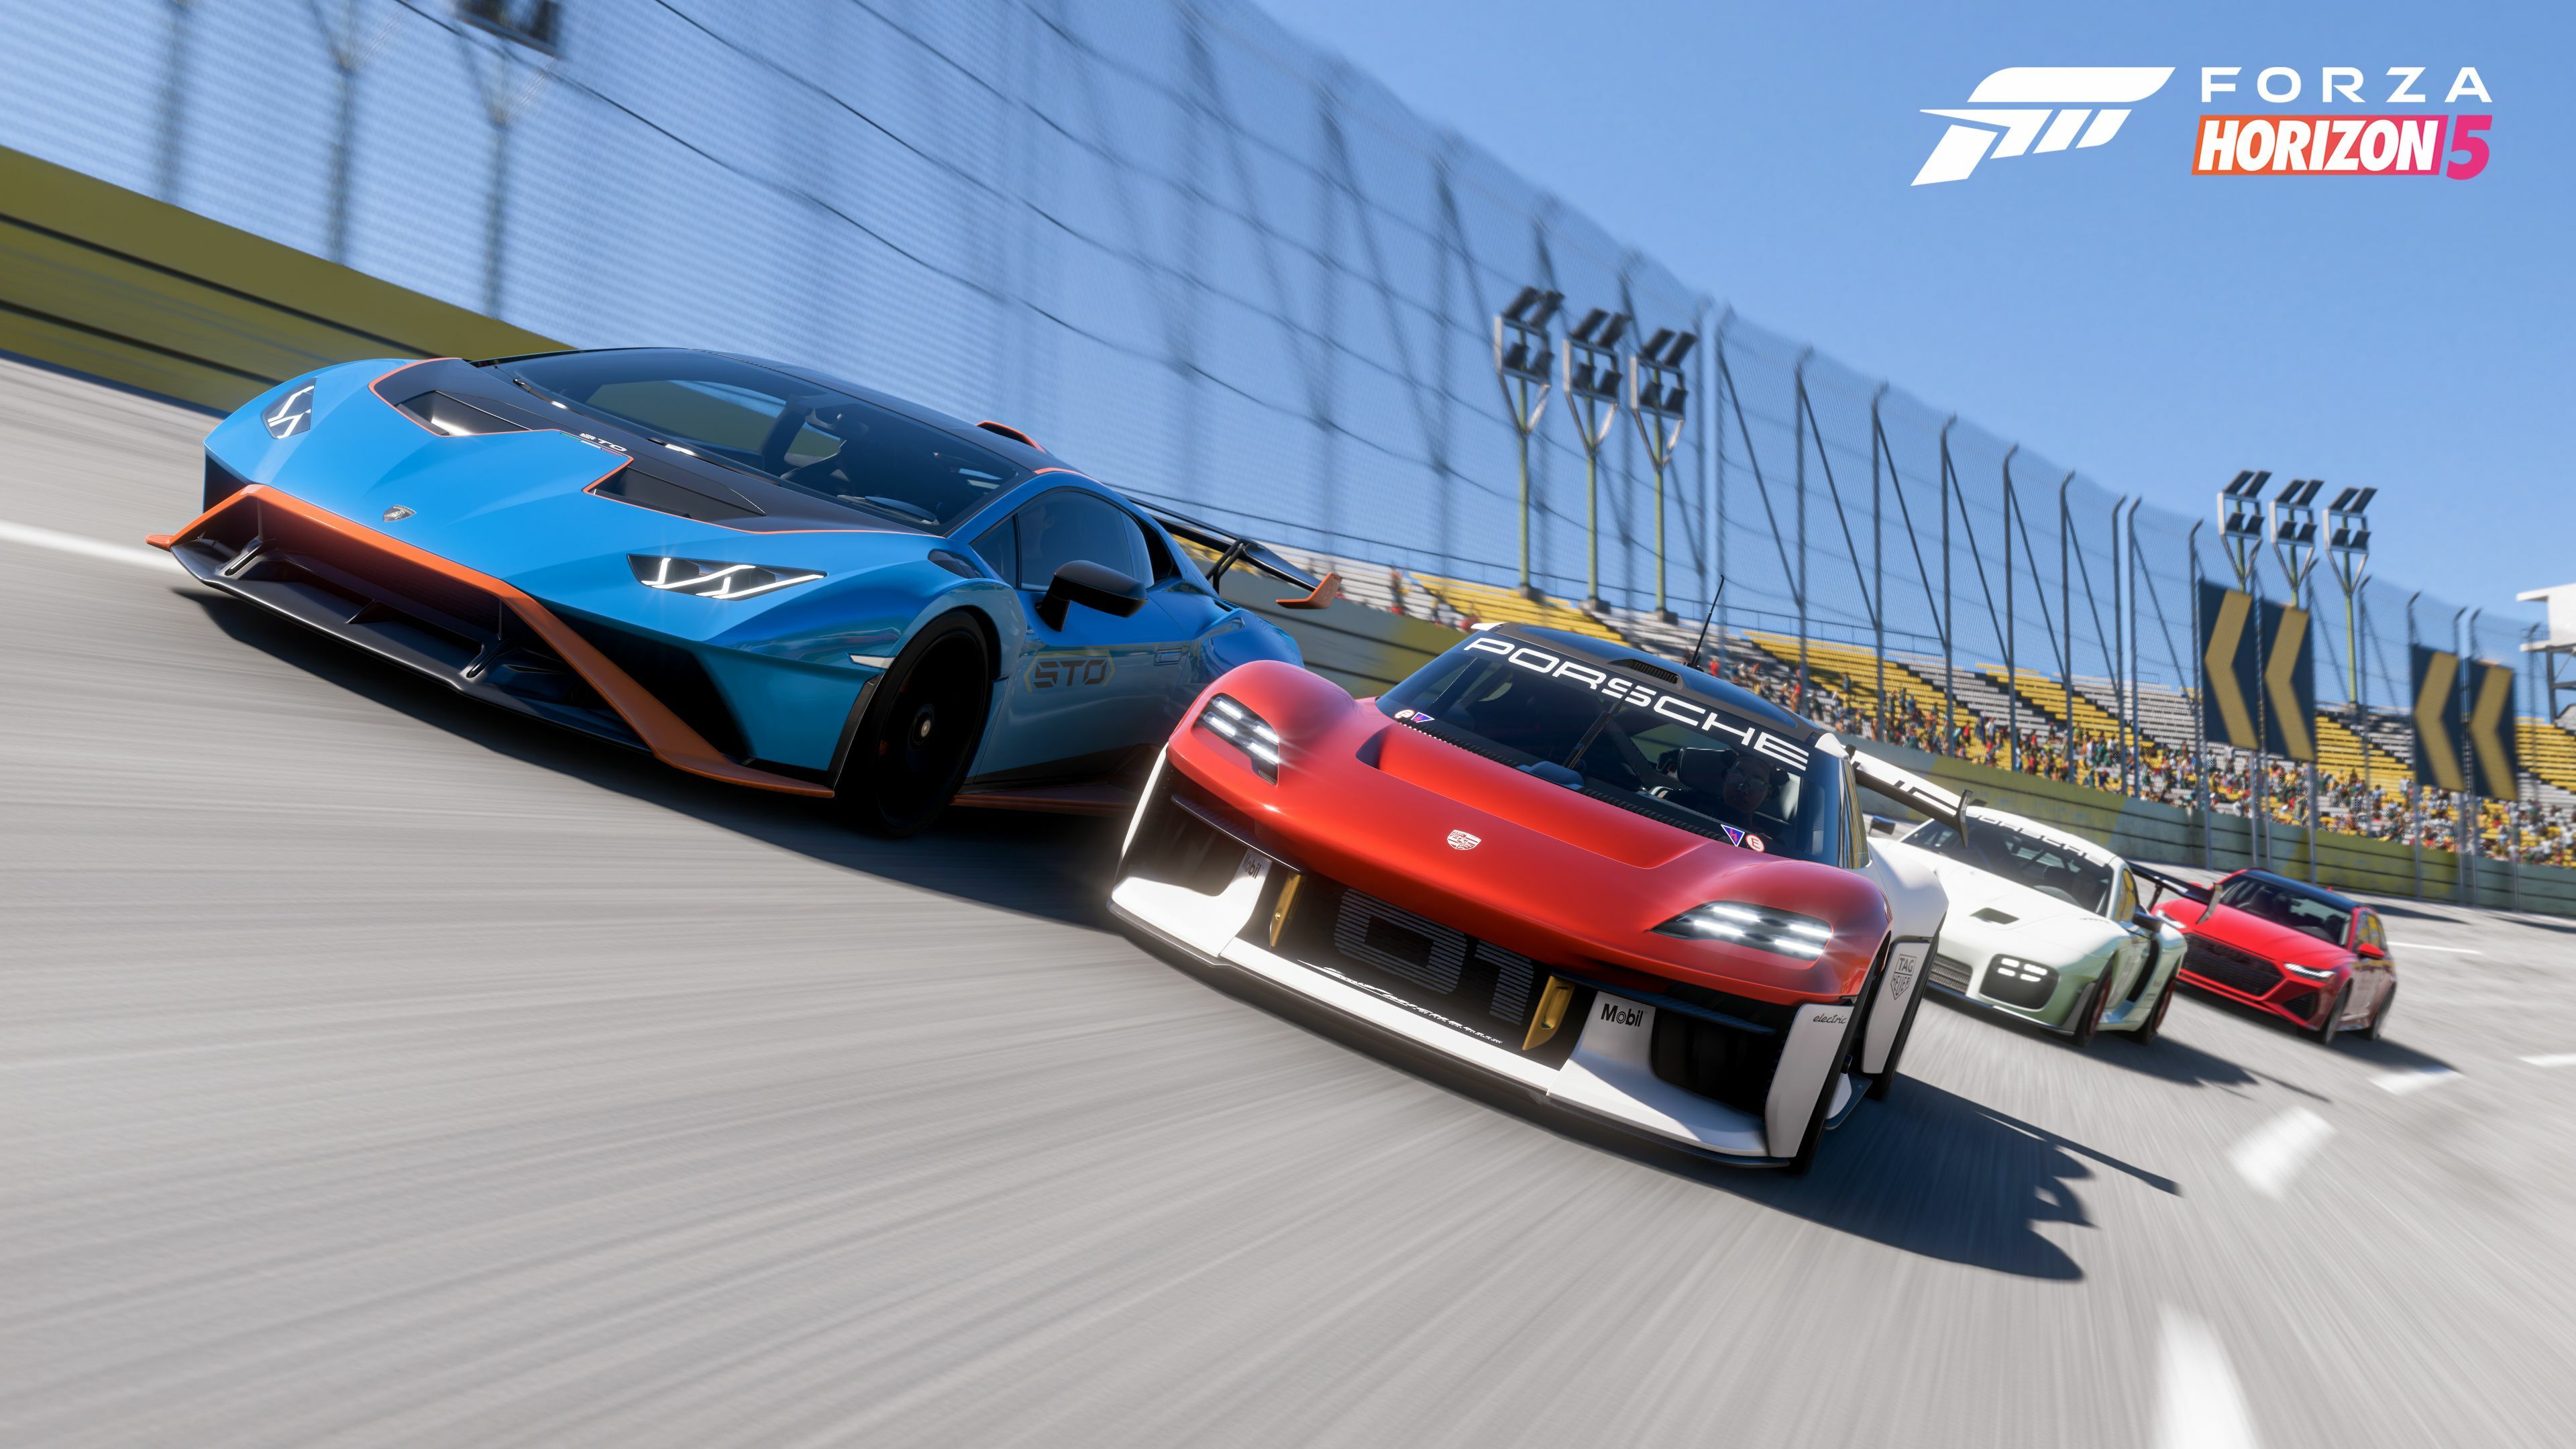 Forza Street- MIRACLE GAMES Store